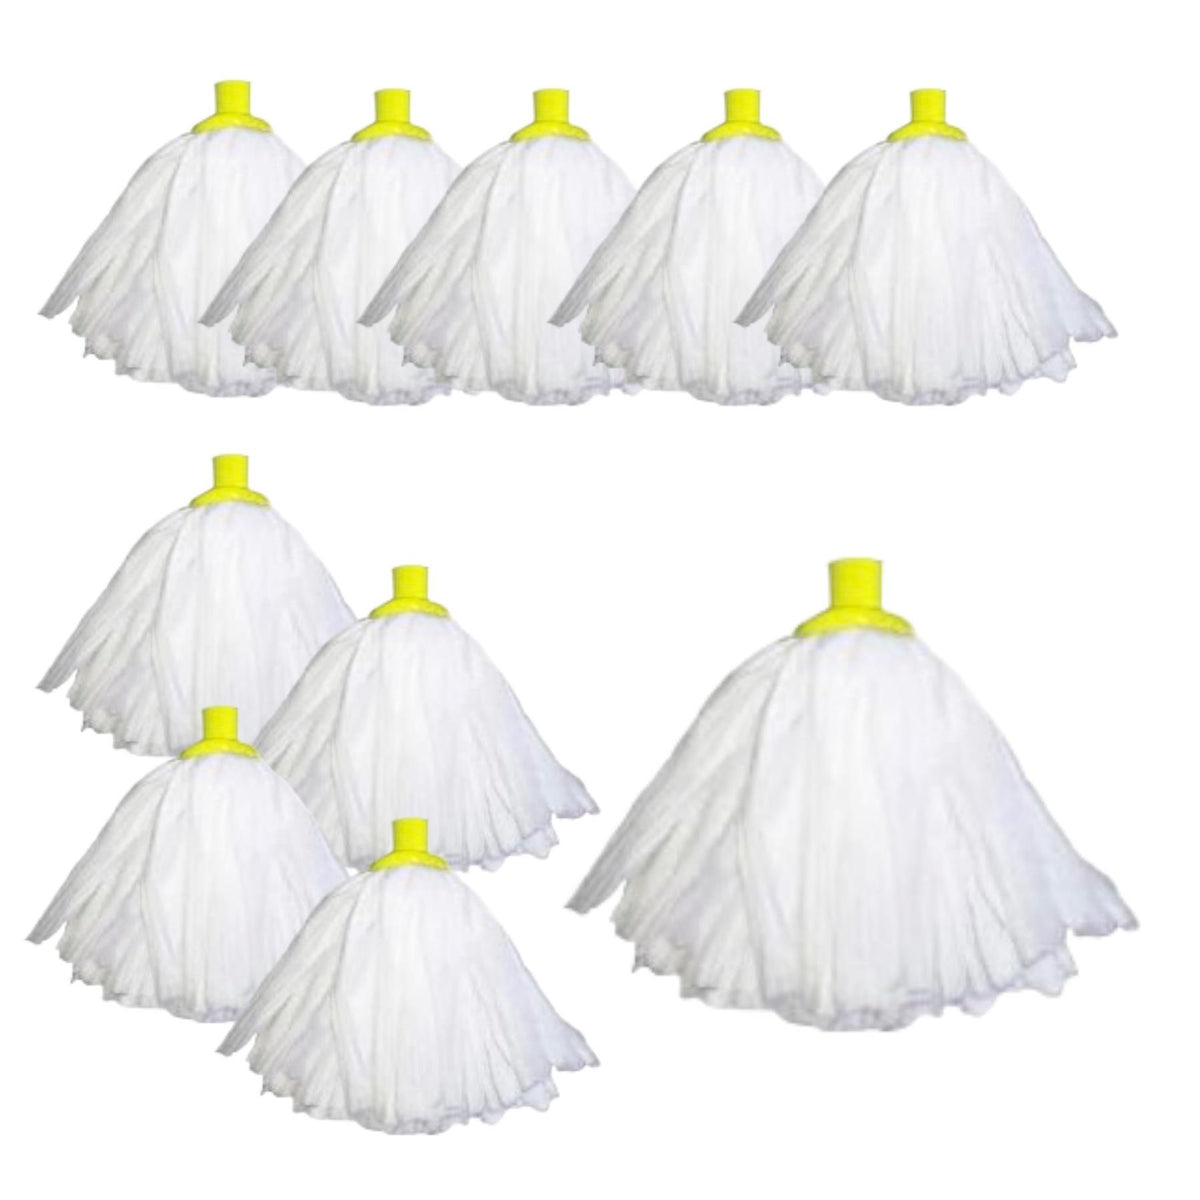 Professional Super White Colour Coded Mop Heads, 10 Yellow